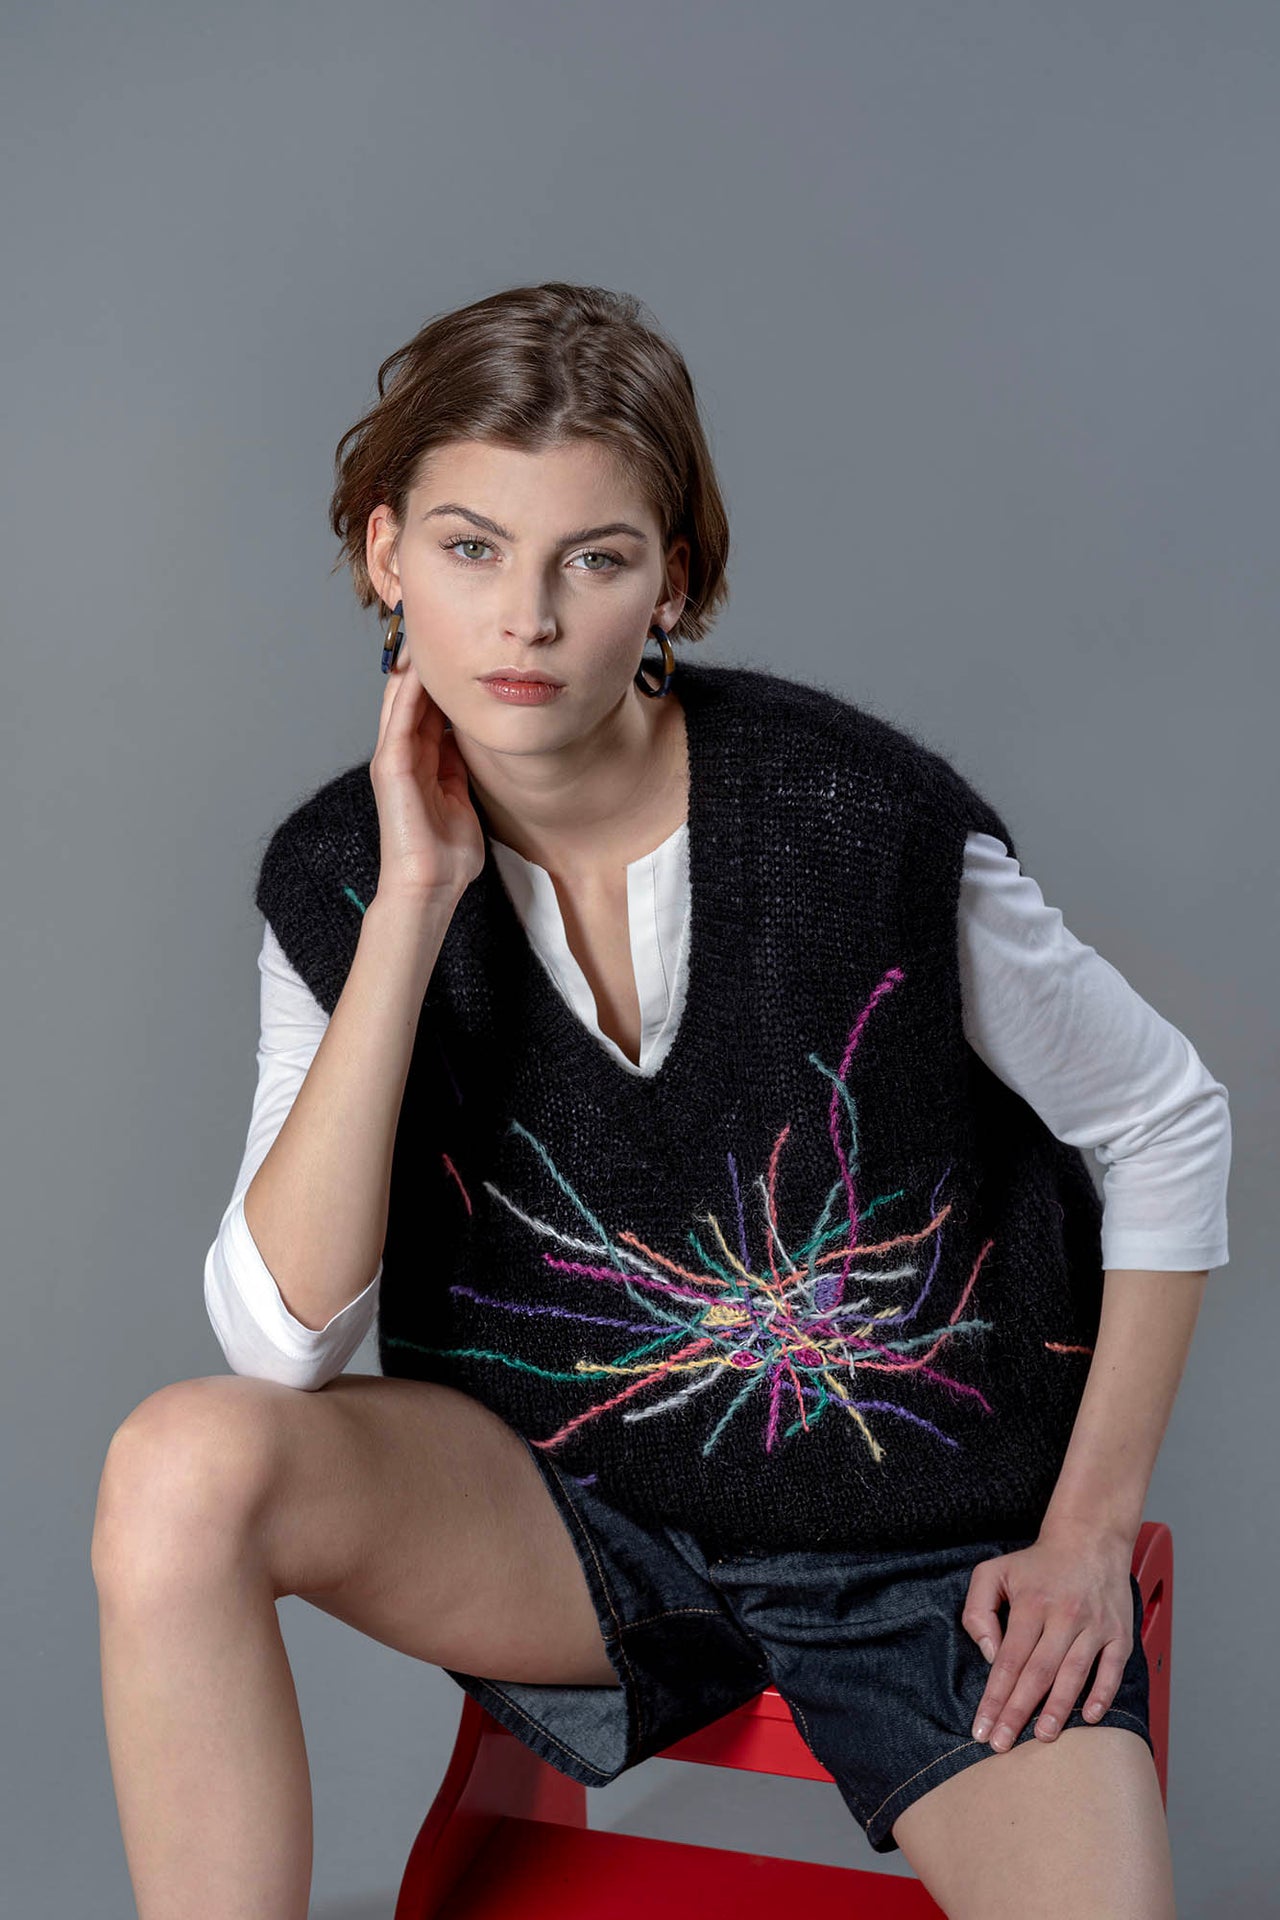 Woman wearing a black mohair vest sitting on a stool. The black vest has colourful embroidered lines going in all directions from the center